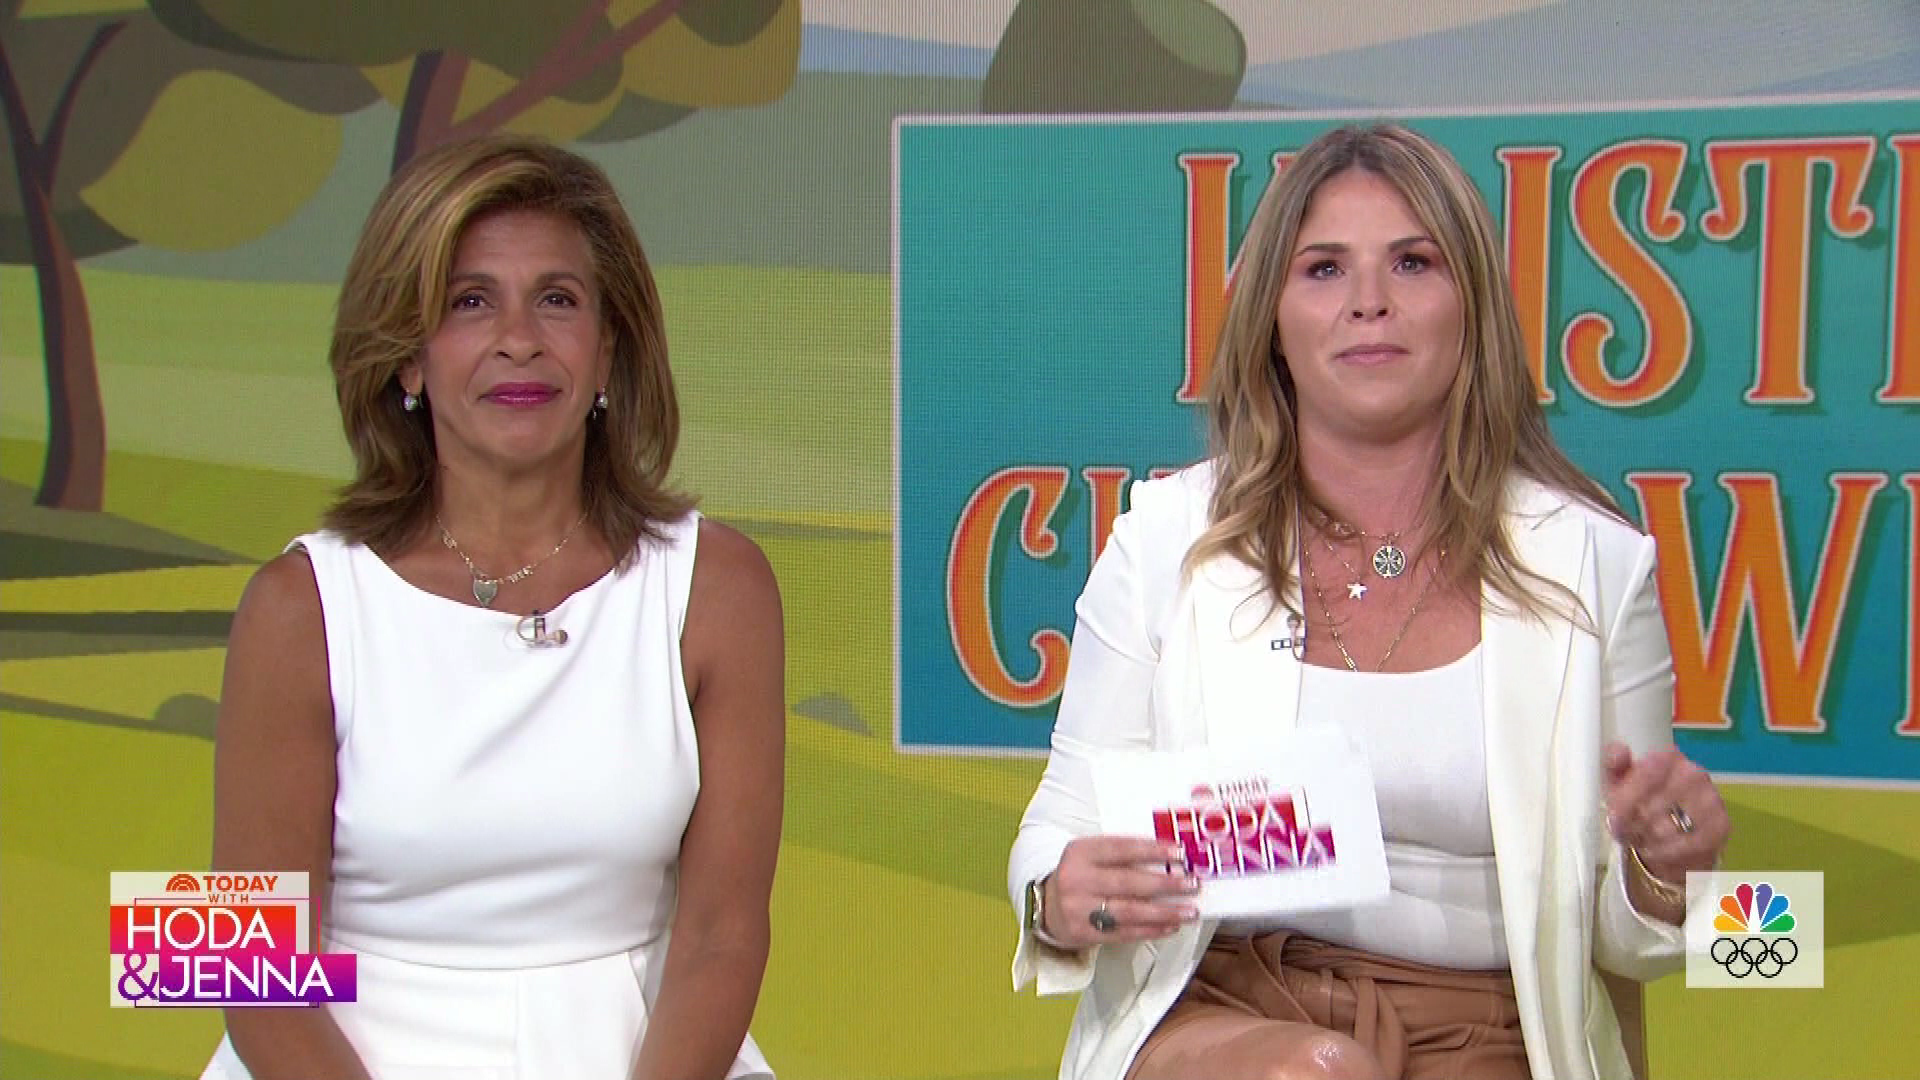 Today With Hoda & Jenna S2021E140 2021-07-16-1000 (09).png